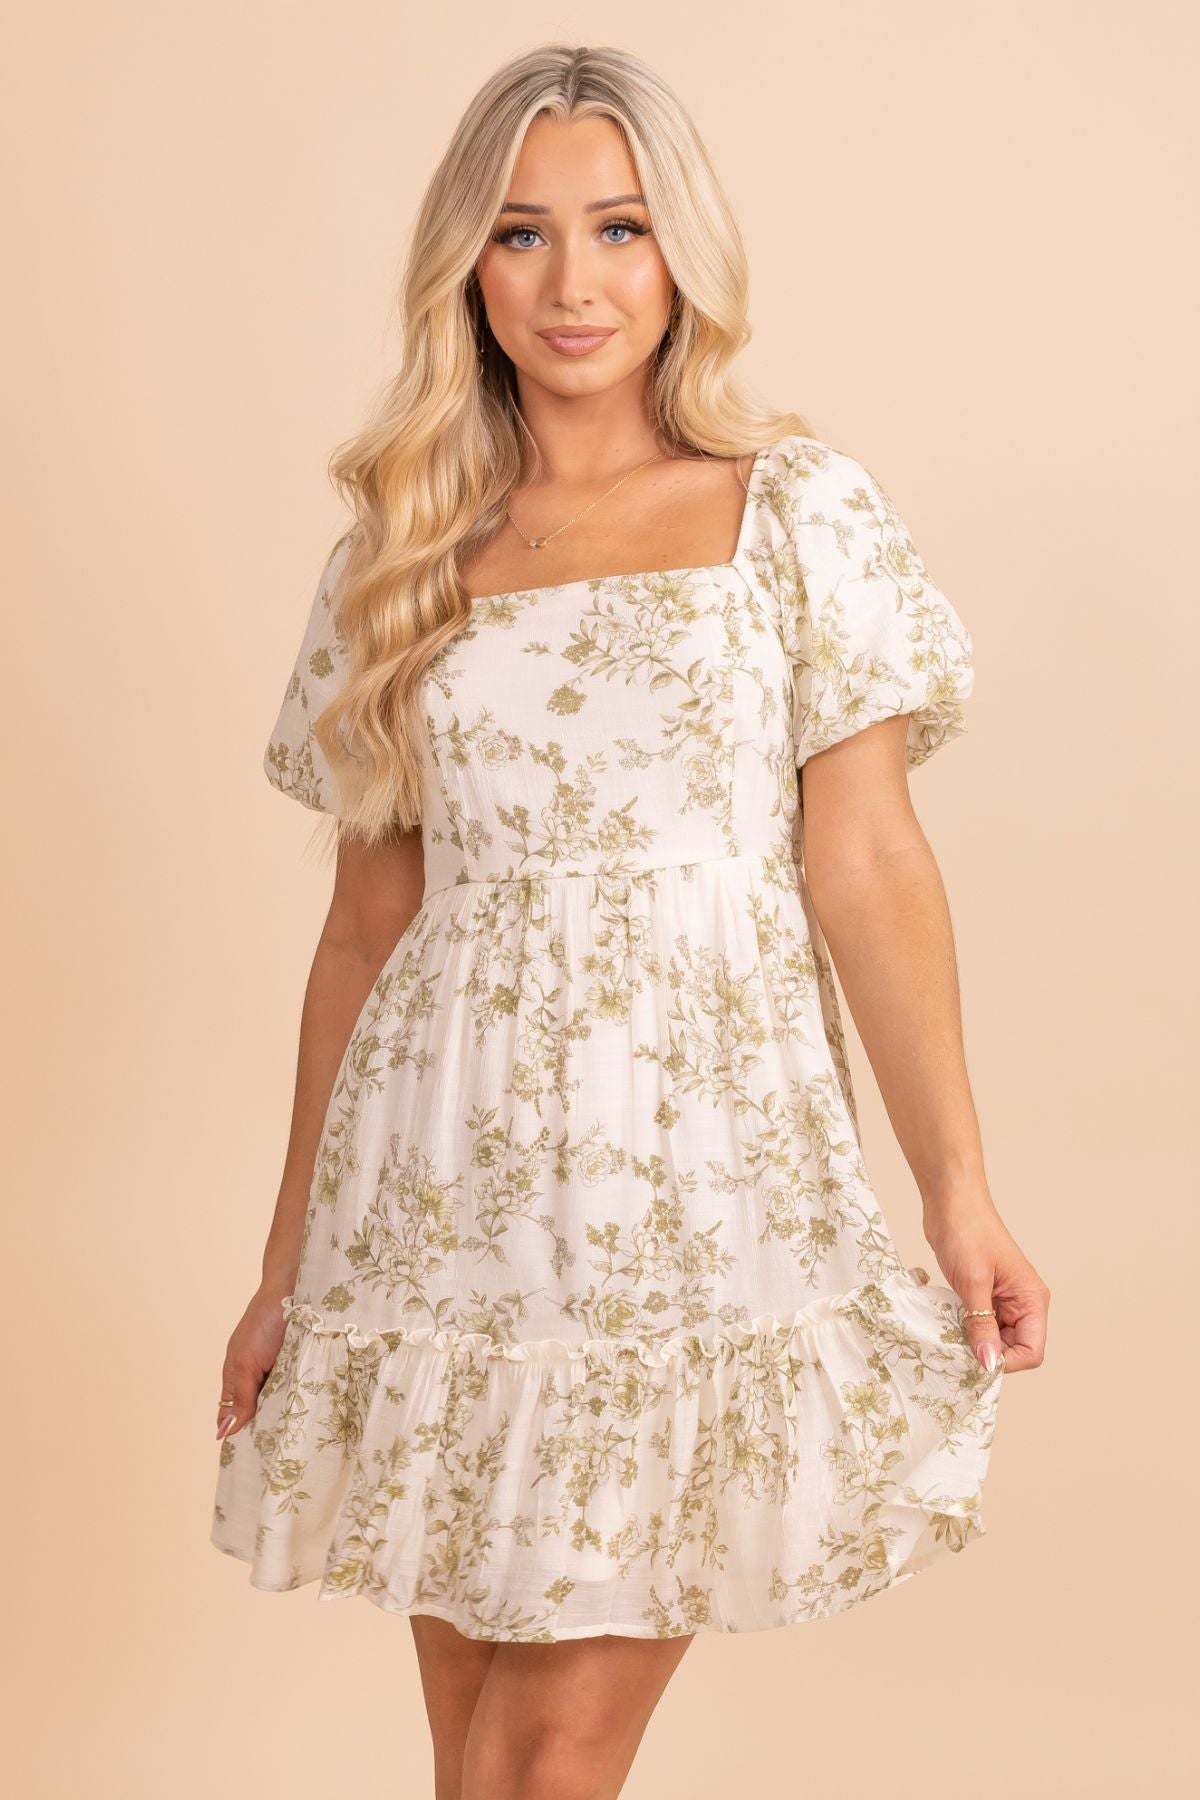 Down to Earth Floral Mini Dress